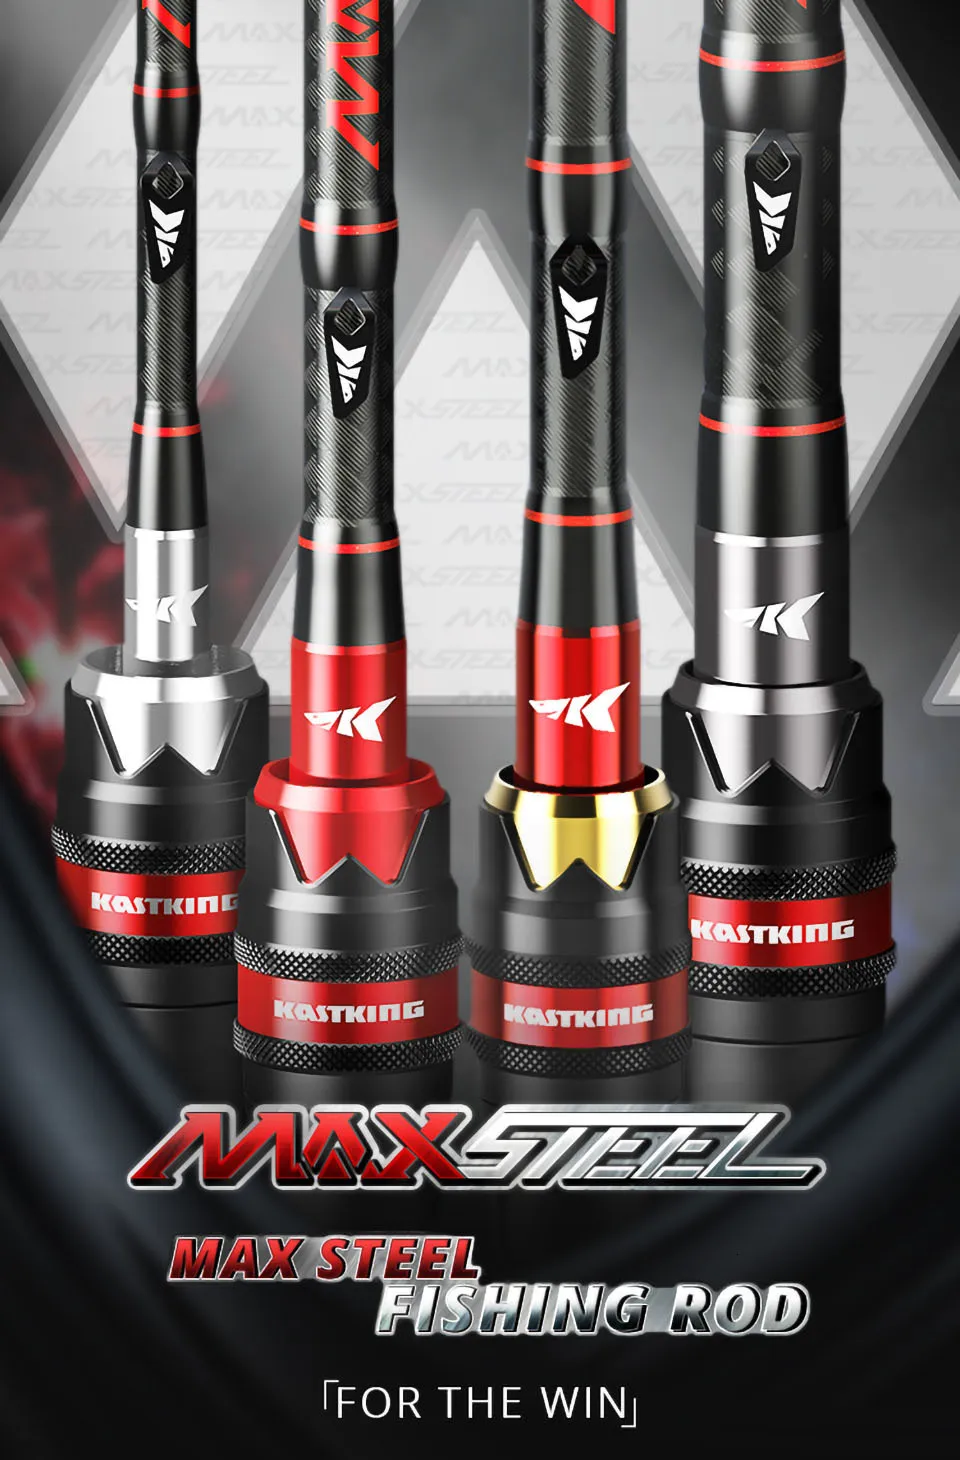 KastKing Max Steel Beastmaster Boat Rod Carbon Spinning Casting For Bass  And Pike Fishing Available In 1.80m, 2.13m; 2.,28m And 2,4m Sizes  Baitcasting Rod 230703 From Ping07, $62.77